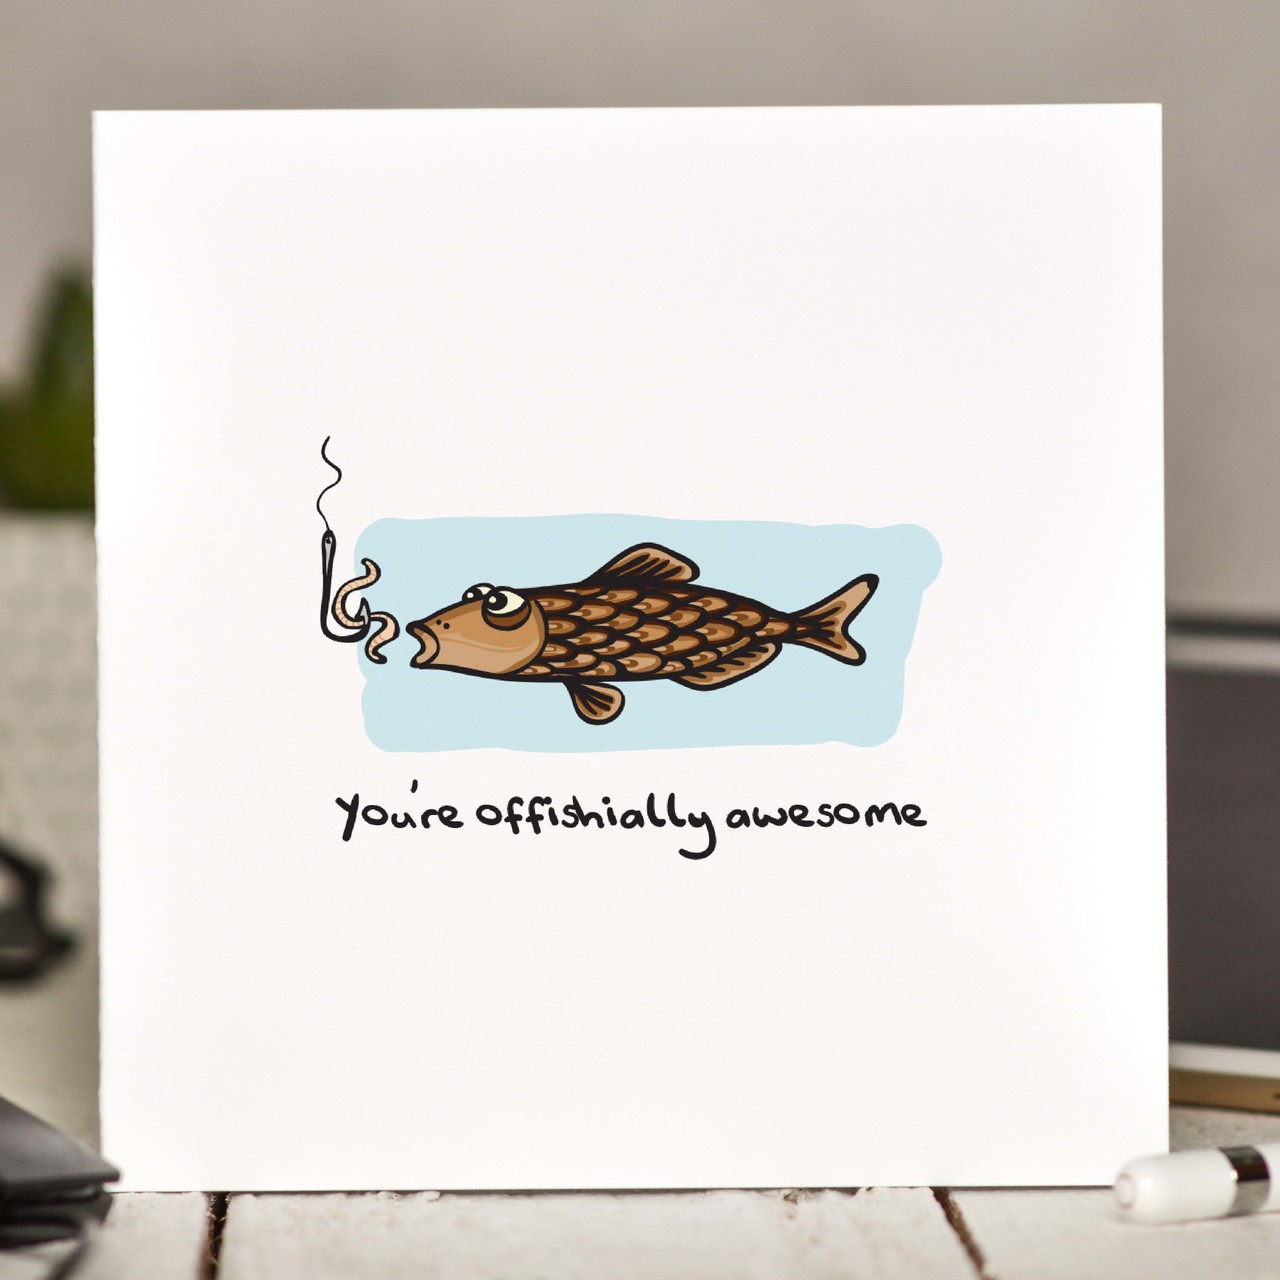 You’re offishially awesome Card